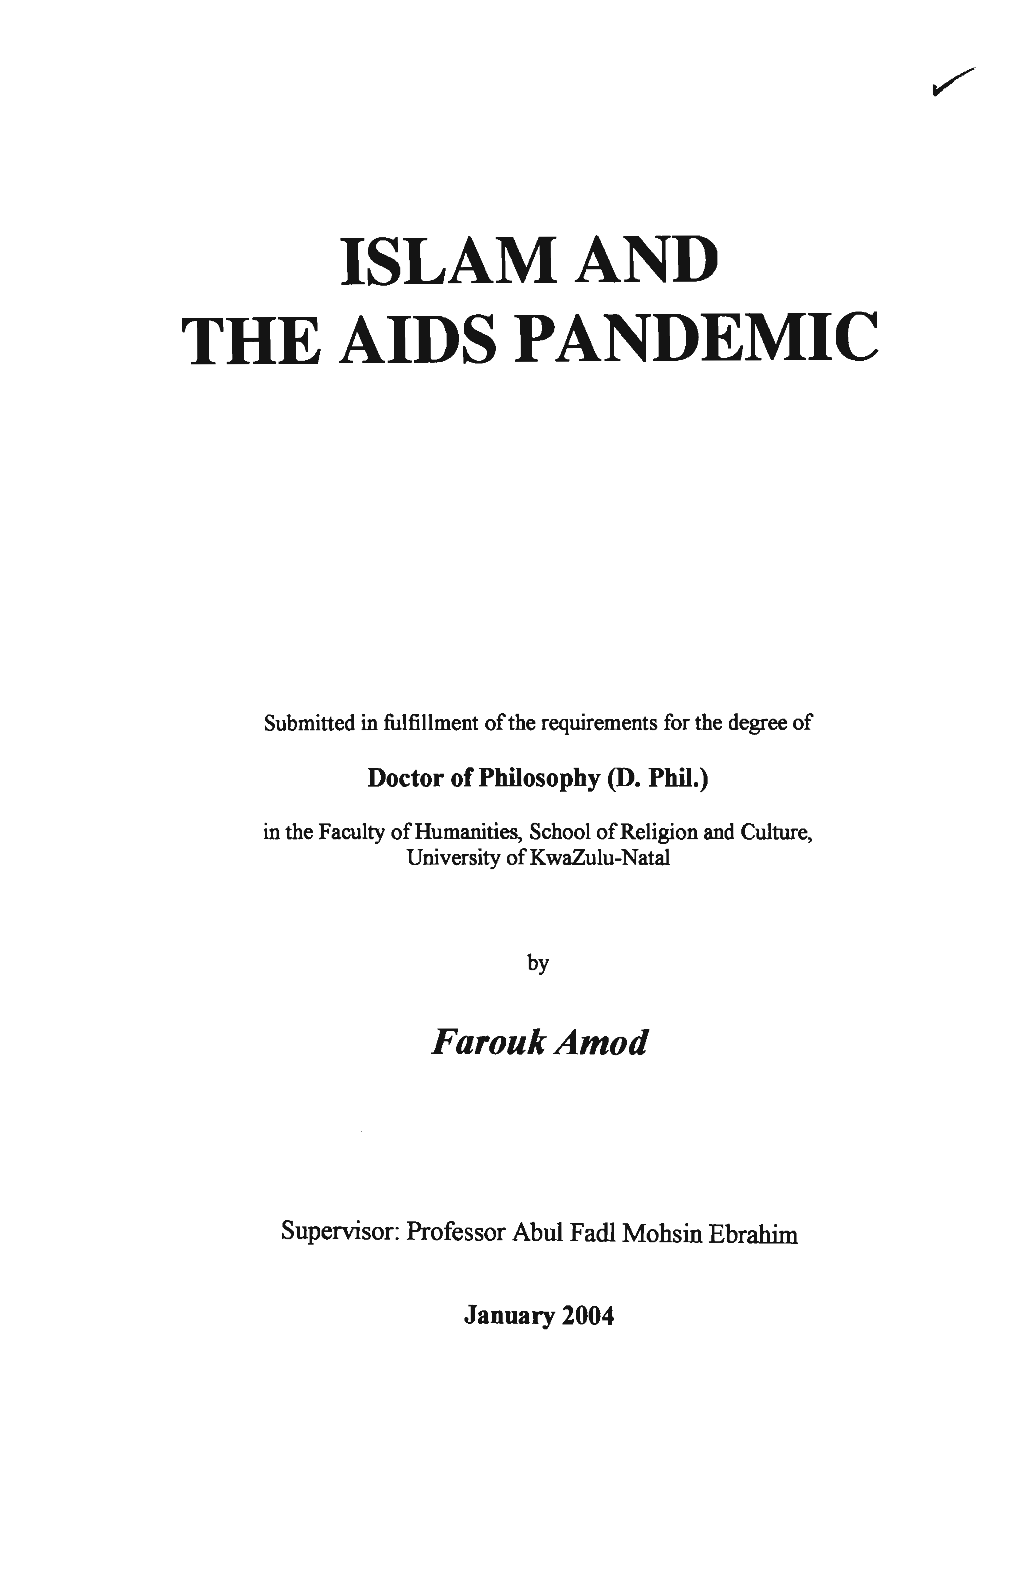 Islam and the Aids Pandemic